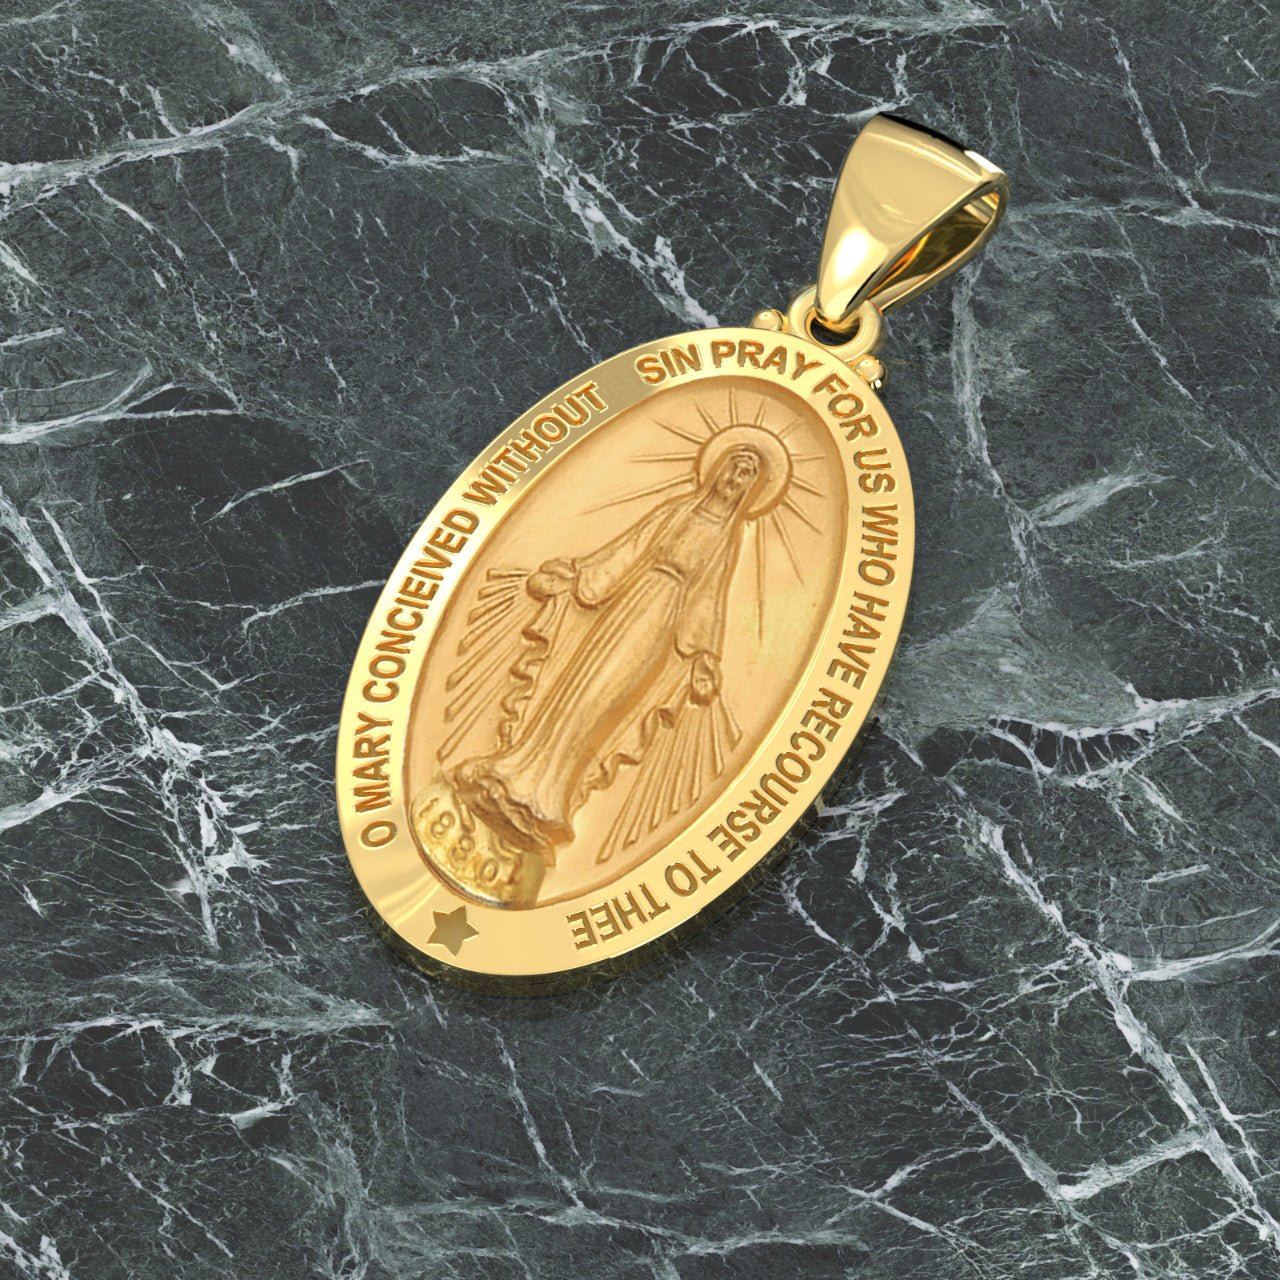 Ladies 14K Yellow Gold Miraculous Virgin Mary Hollow Oval Polished Pendant Necklace, 24mm - US Jewels